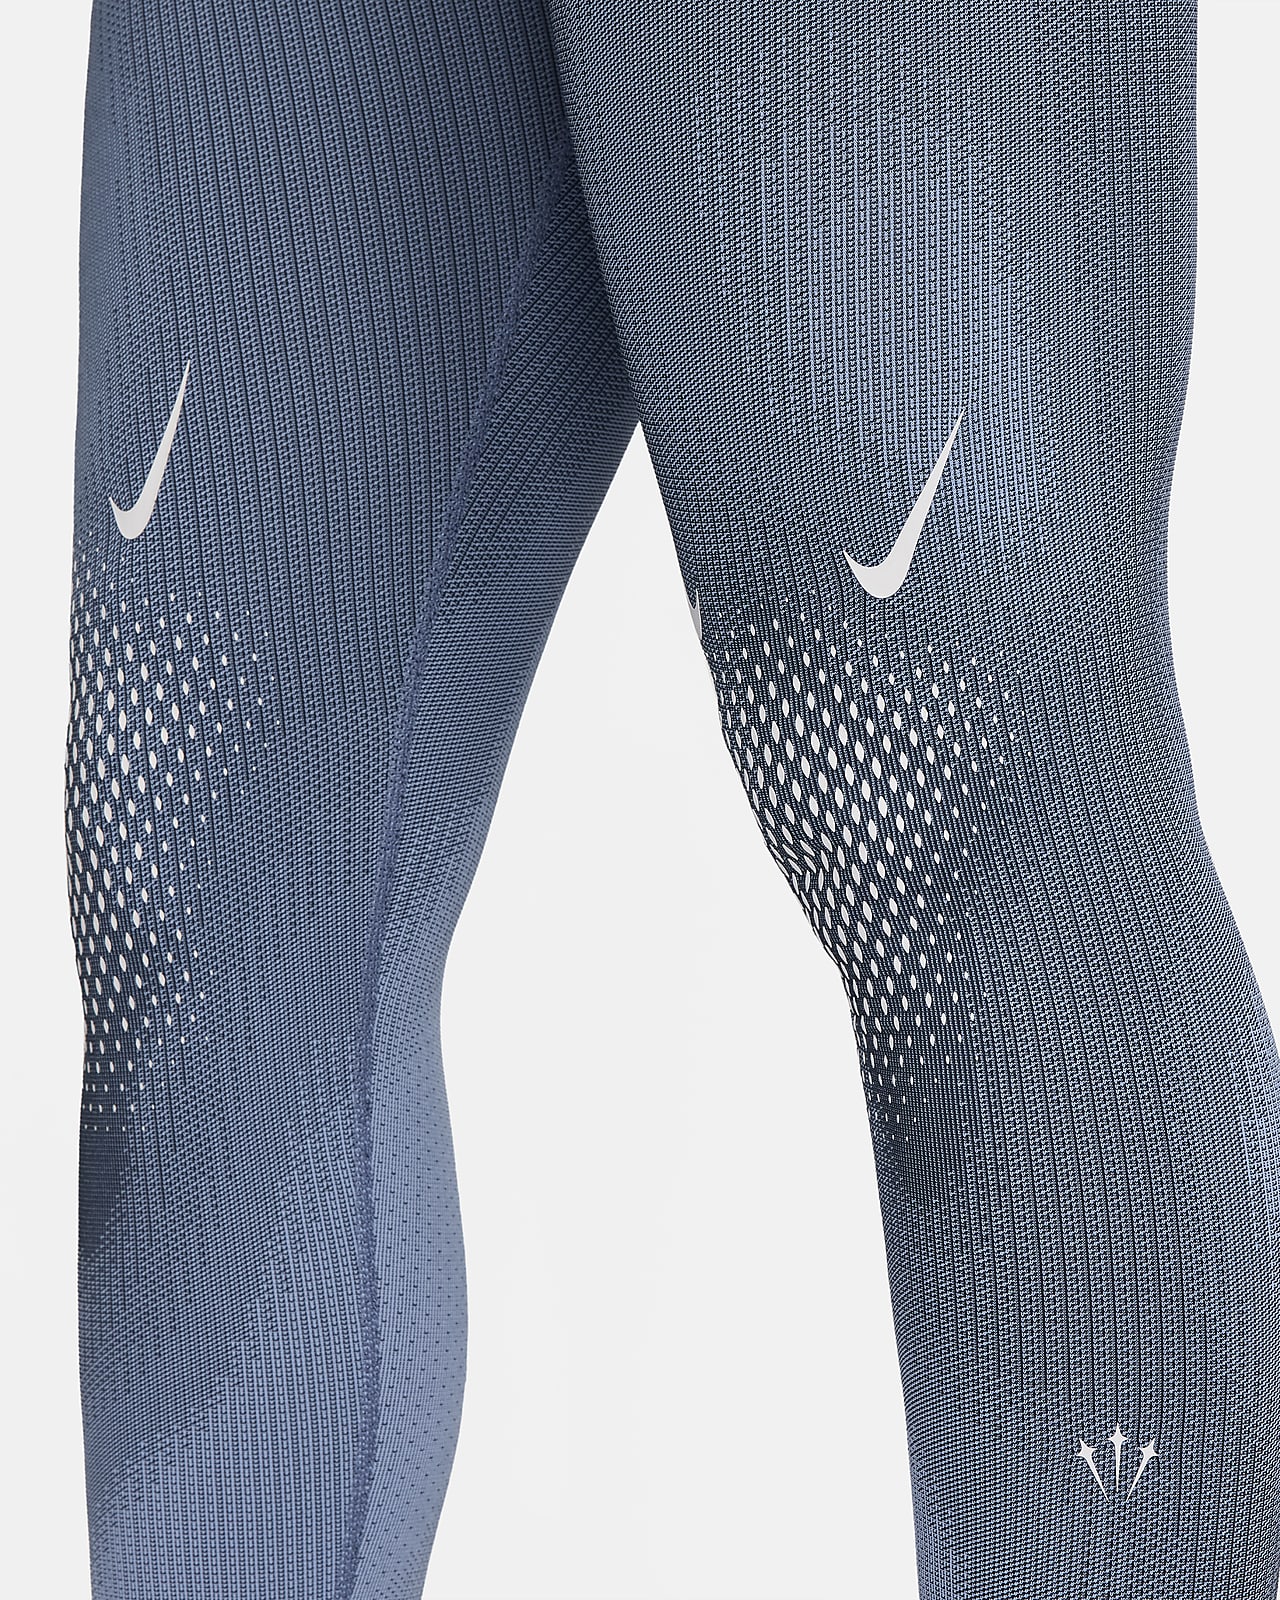 Nike Women's Dri-Fit Relay Crop Training Tights-turquoise